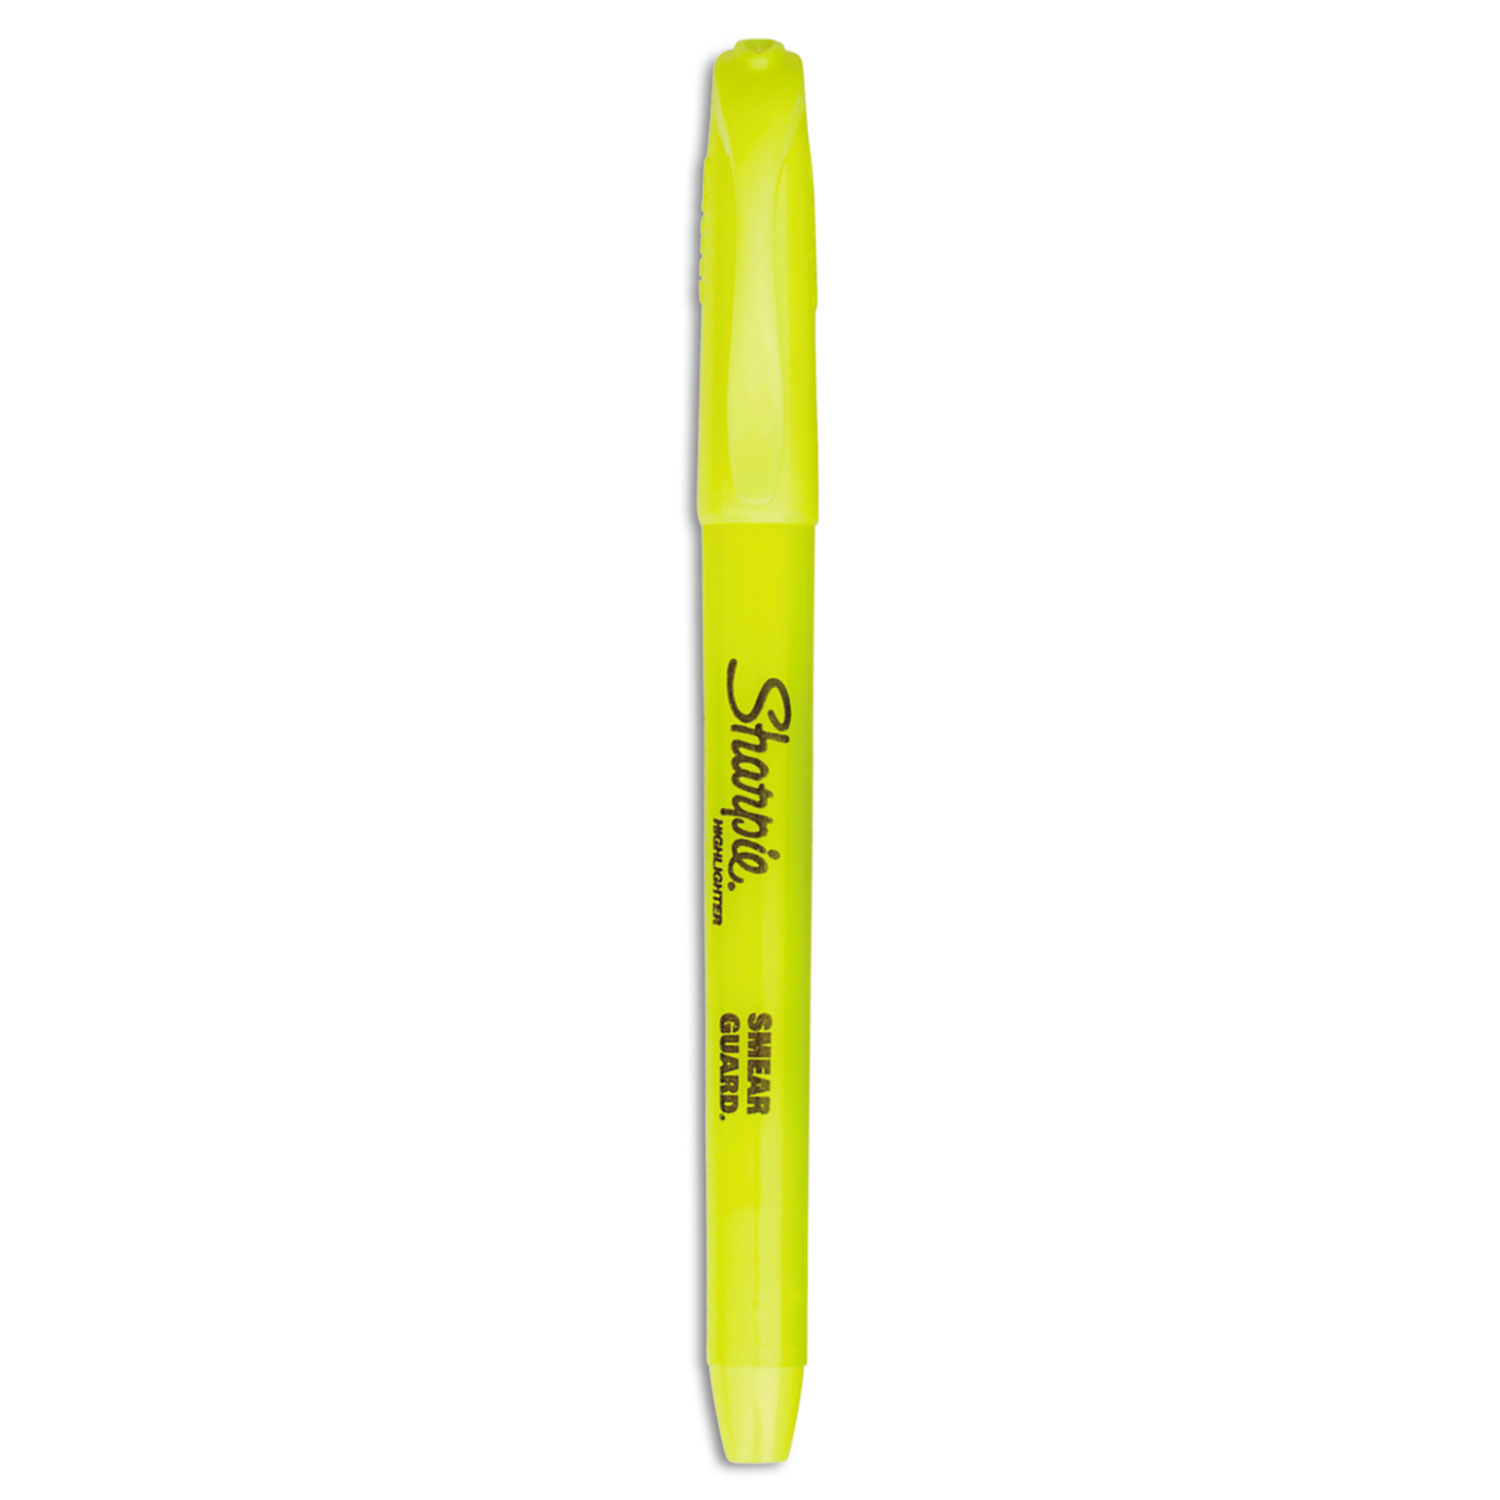 Sharpie Accent Tank Style Highlighter, Chisel Tip, Fluorescent Yellow